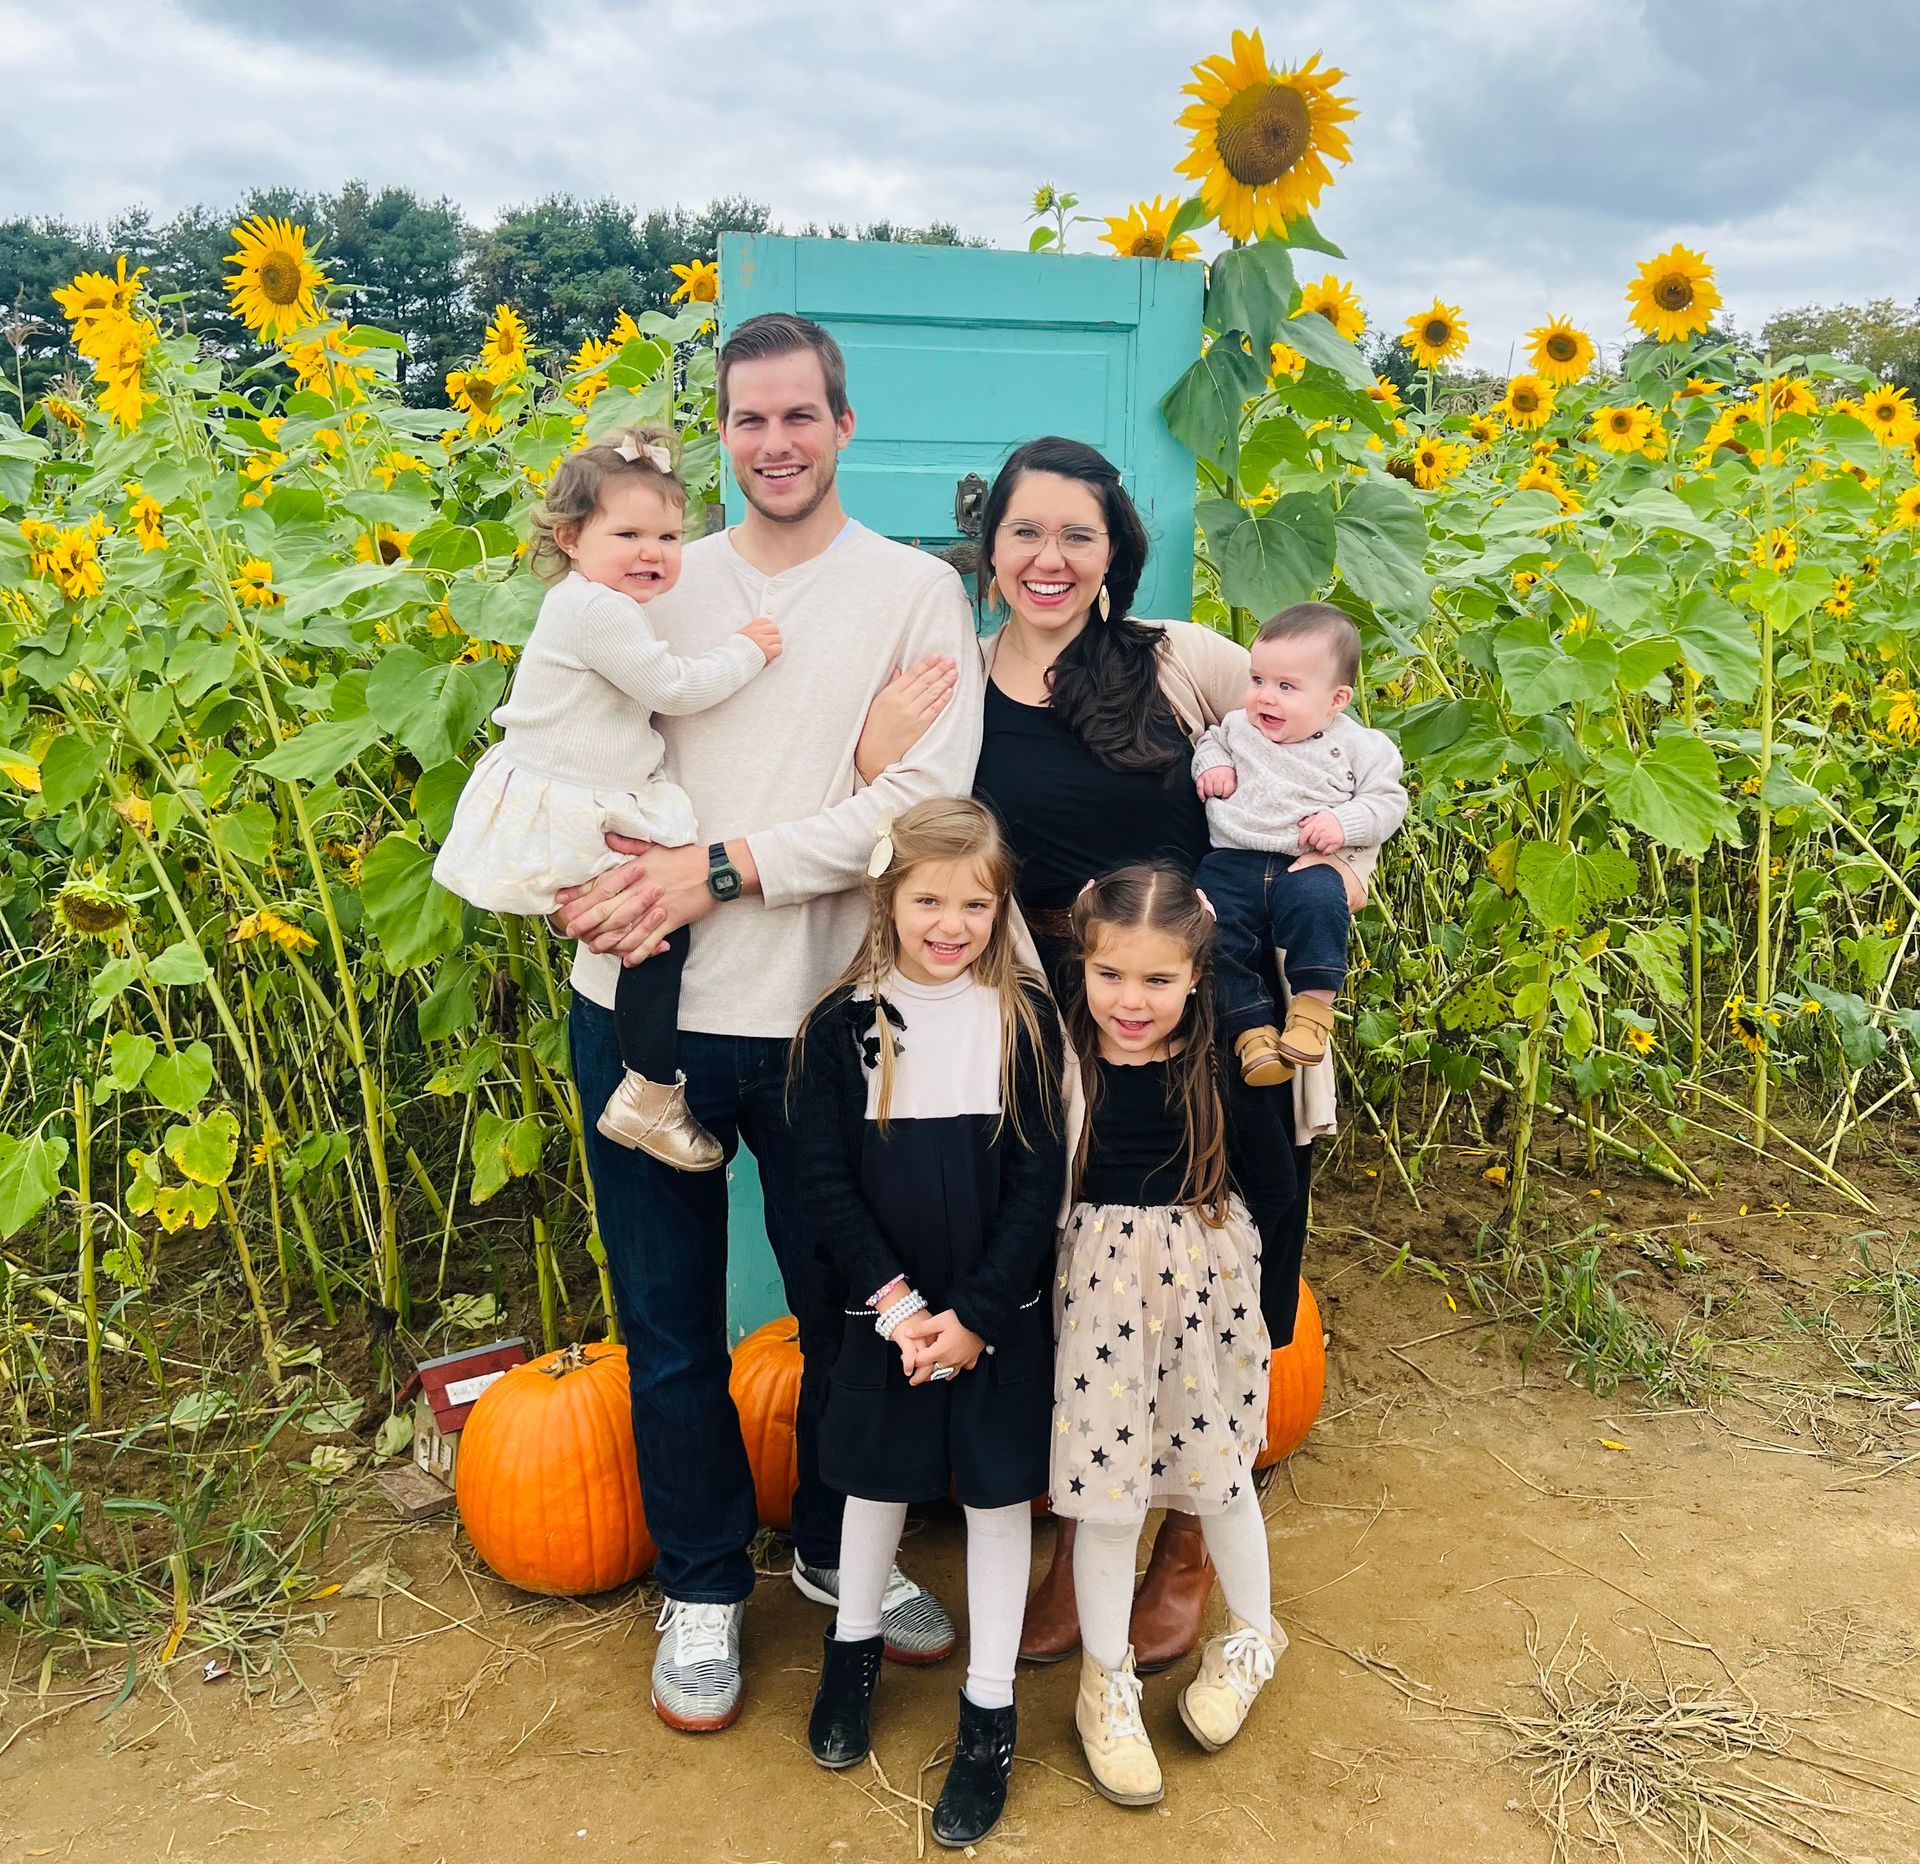 A family is posing for a picture in a field of sunflowers and pumpkins.